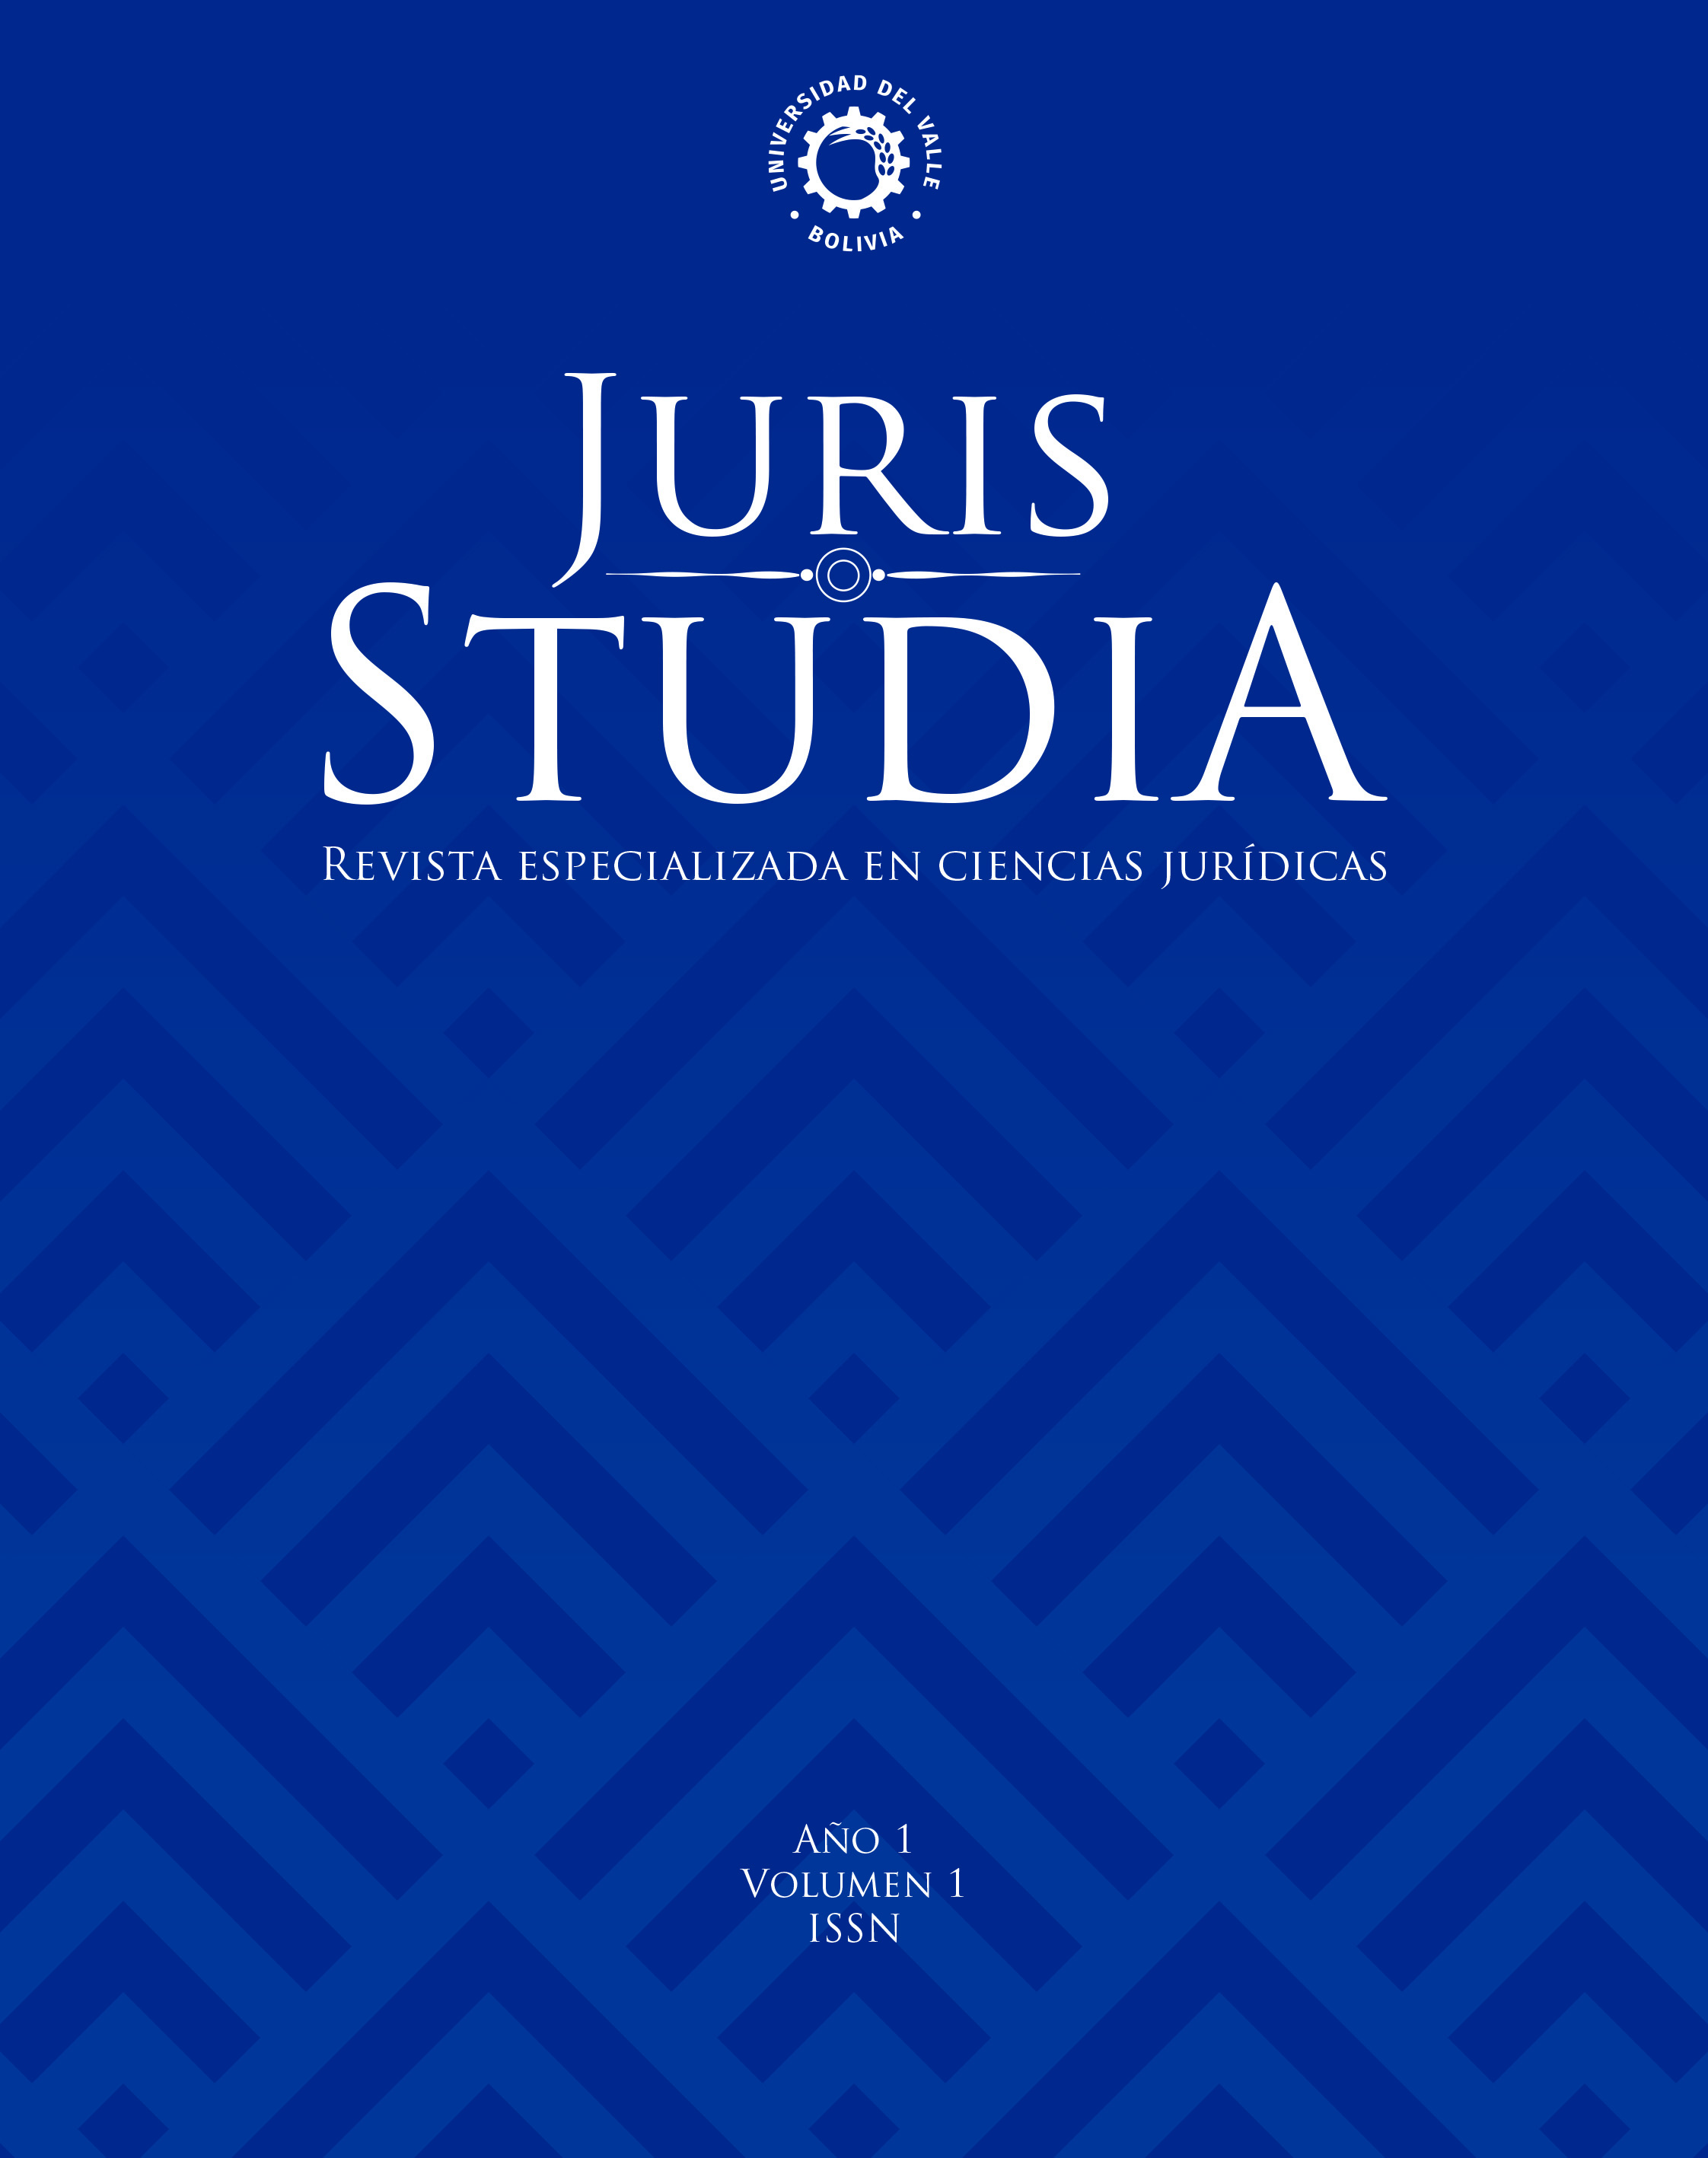 					View Vol. 1 No. 1 (1): JURIS SITUDIA: Journal specialized in legal sciences
				